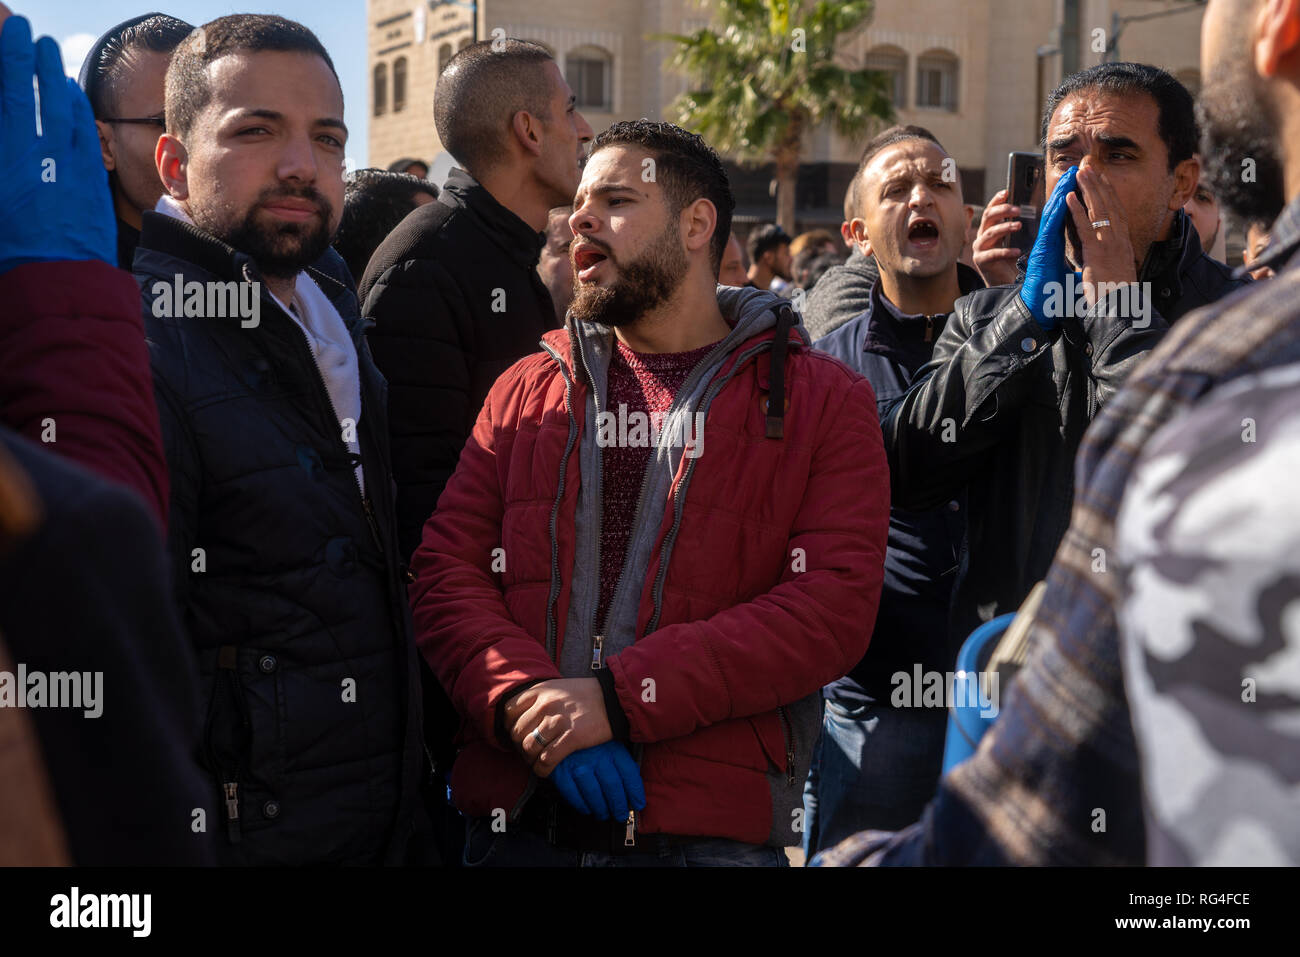 Palestinians protest against Palestinian Authority social security taxes in Ramallah Stock Photo